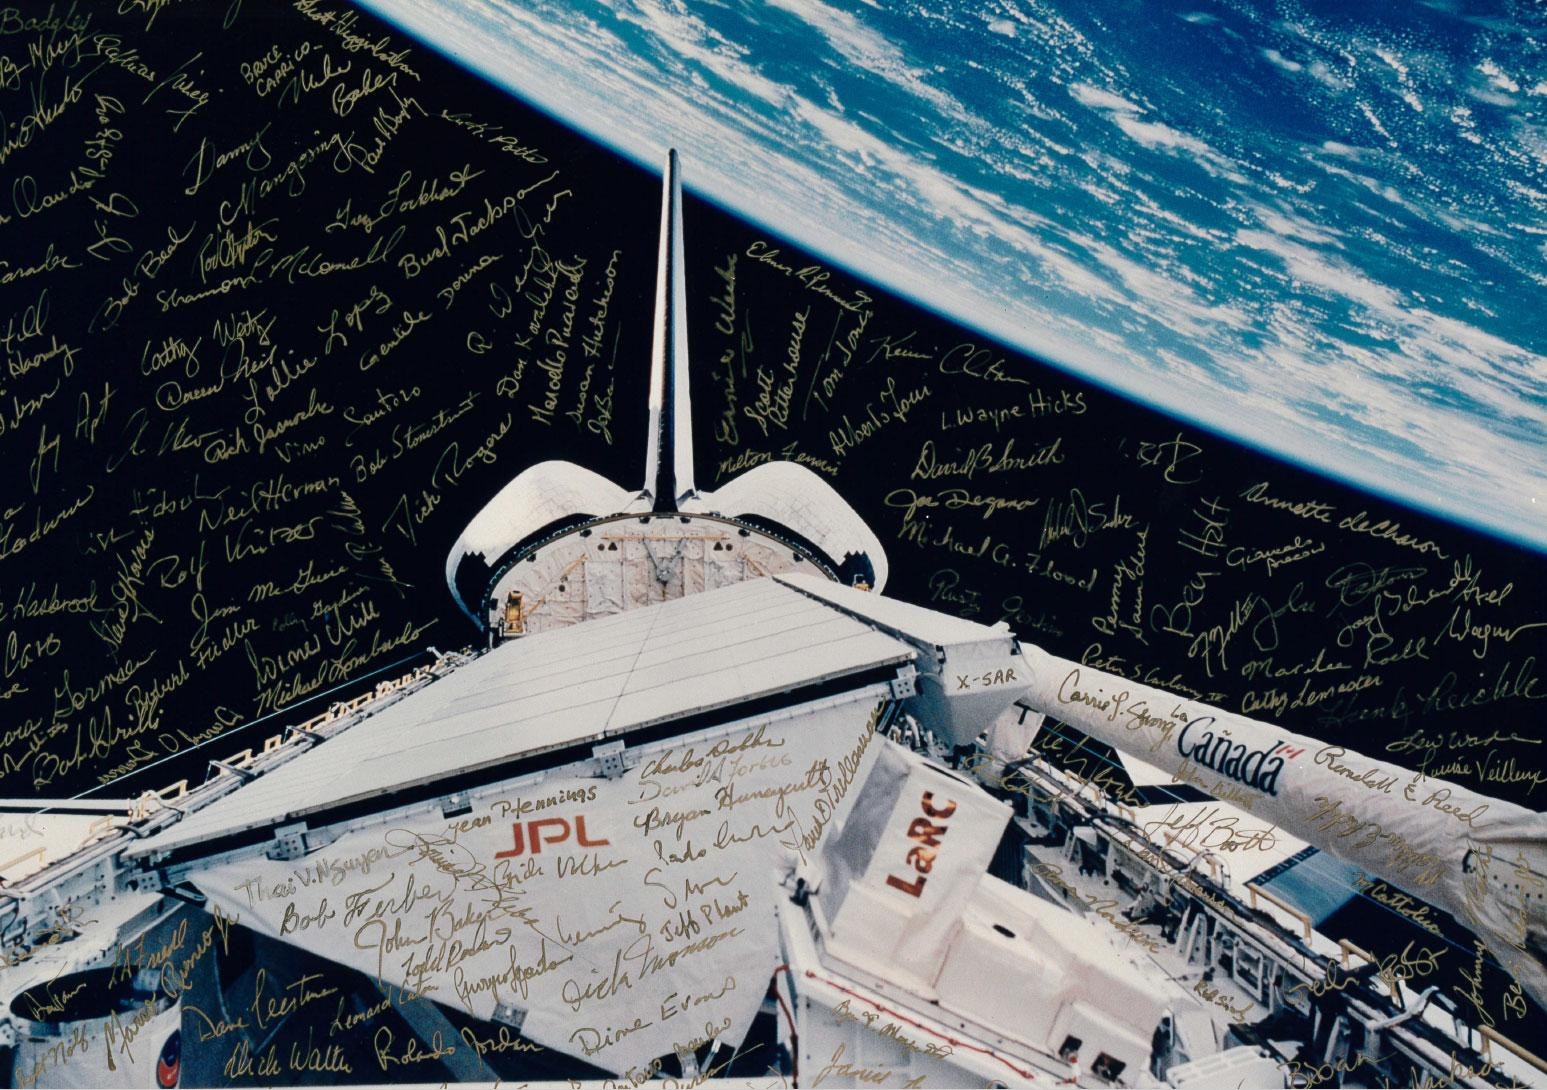 Payload bay of Space Shuttle Endeavour with the signatures of many members of the team